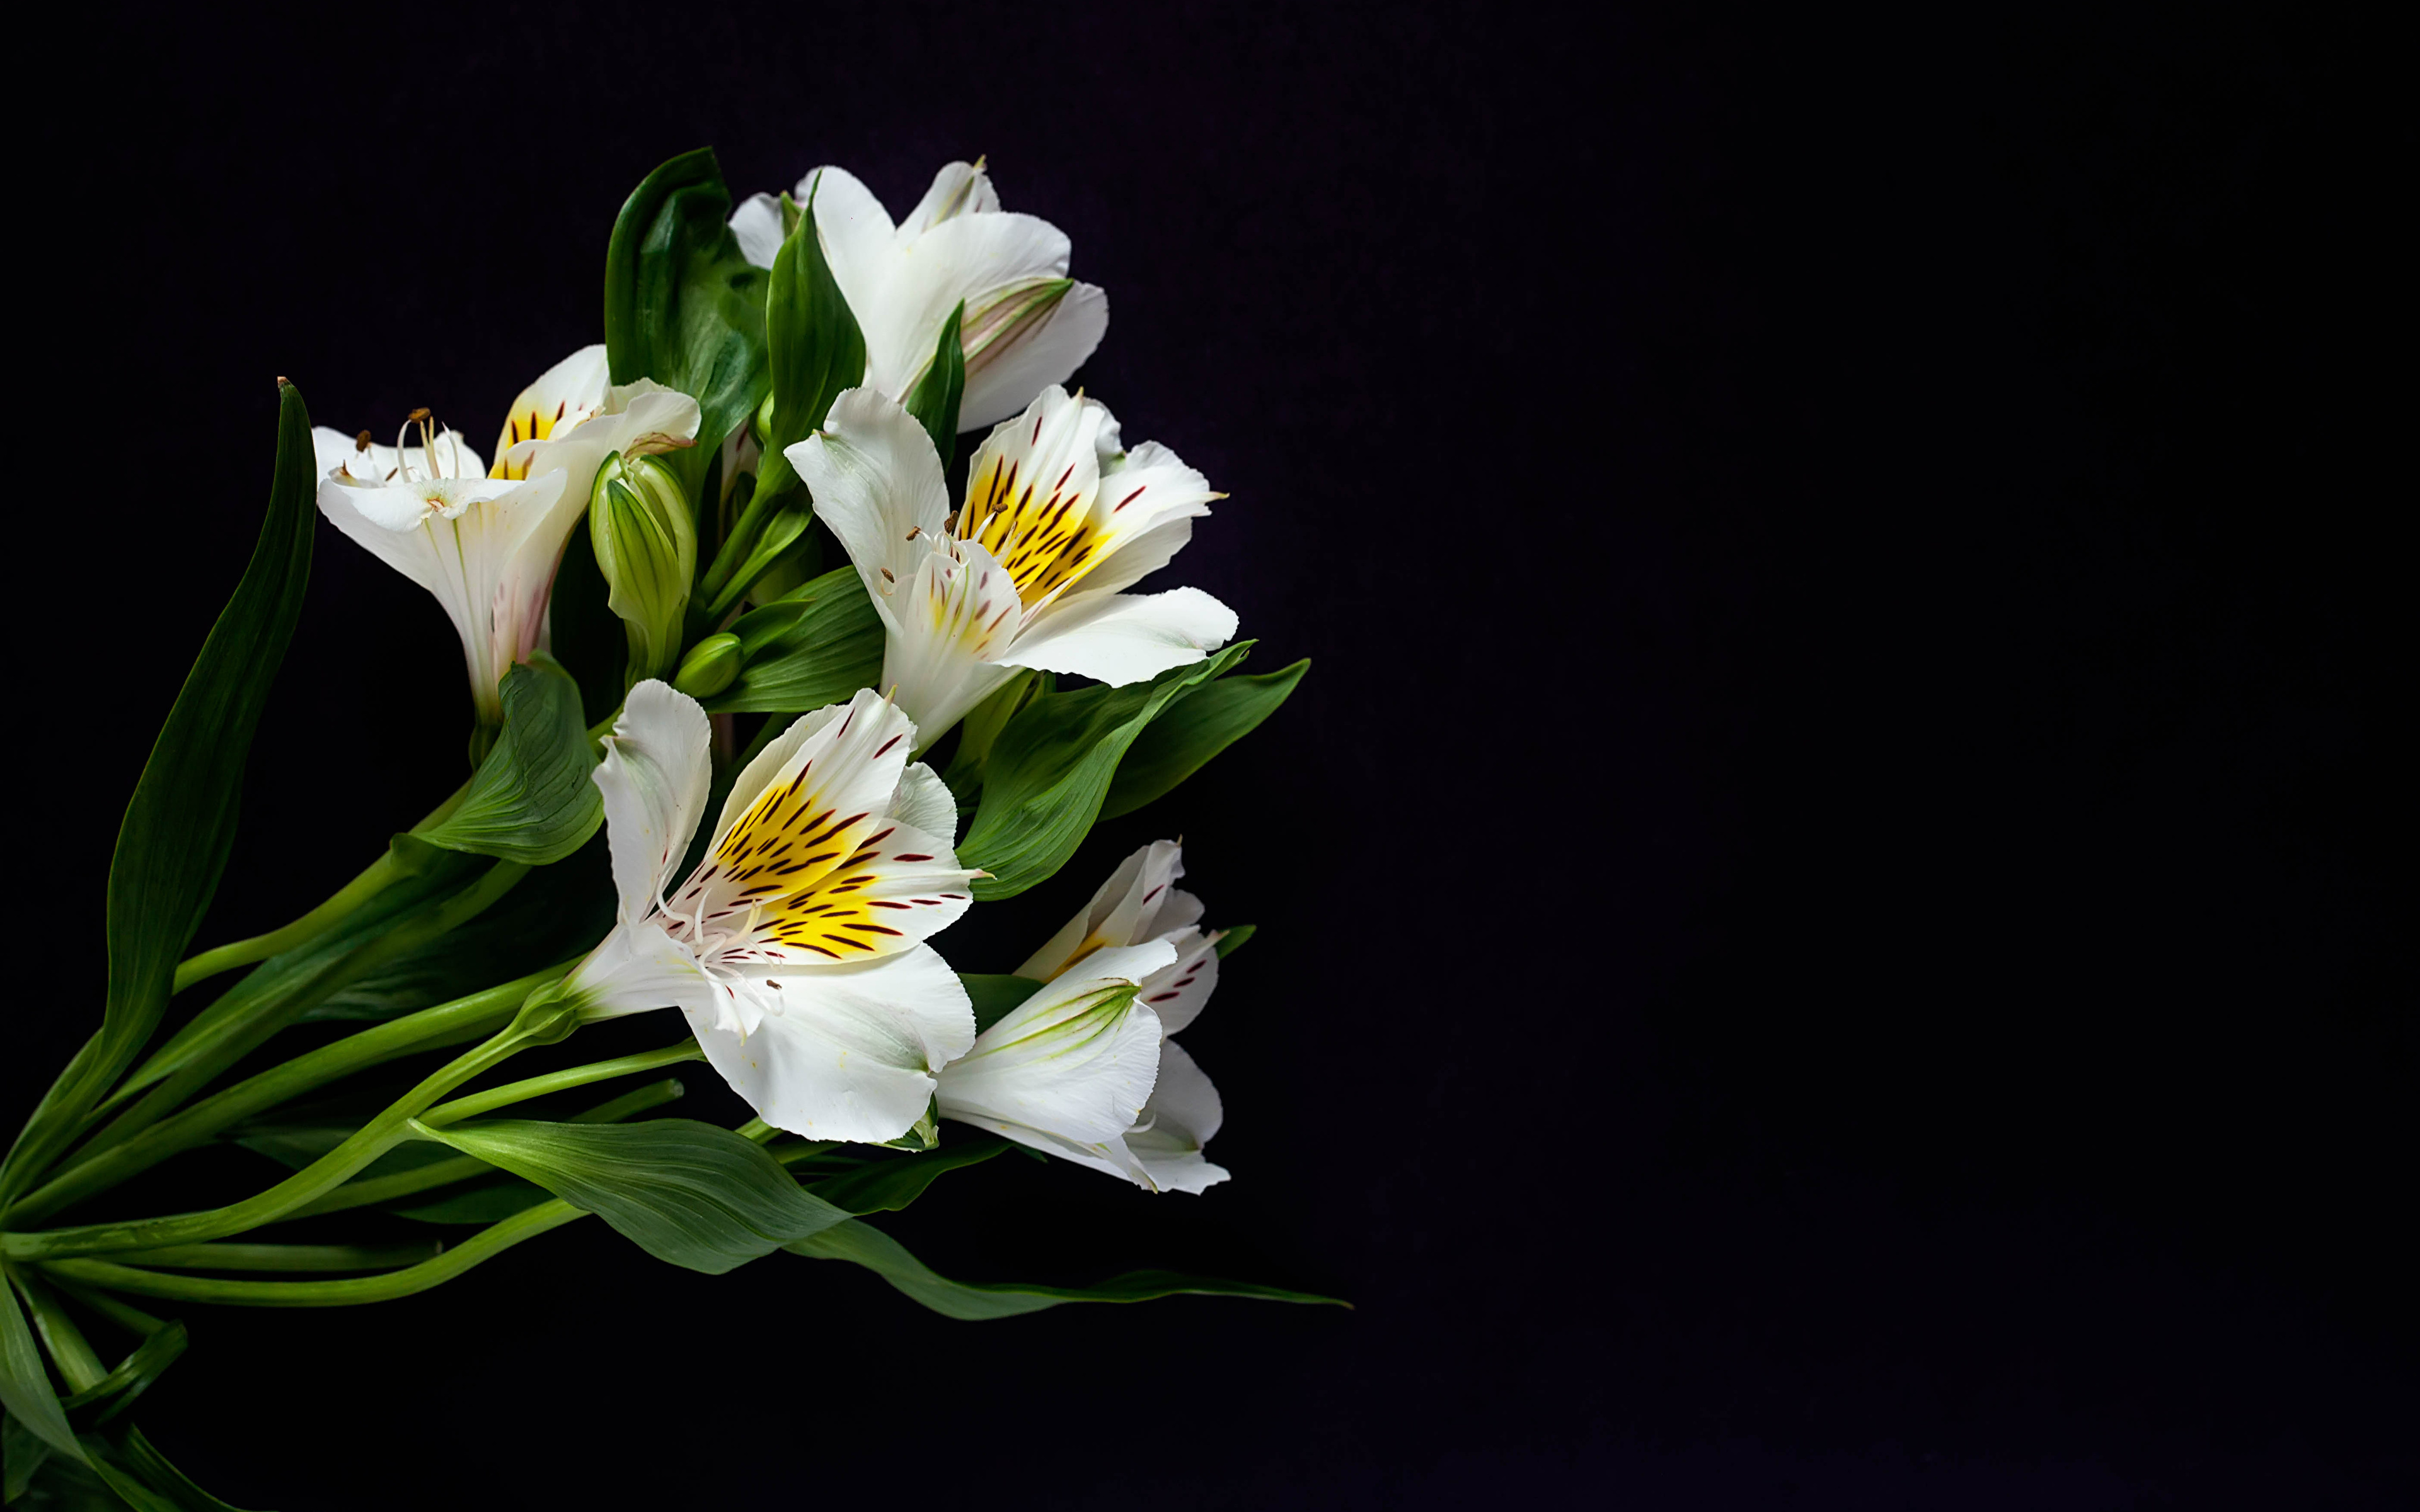 Flowers With Black Background - HD Wallpaper 